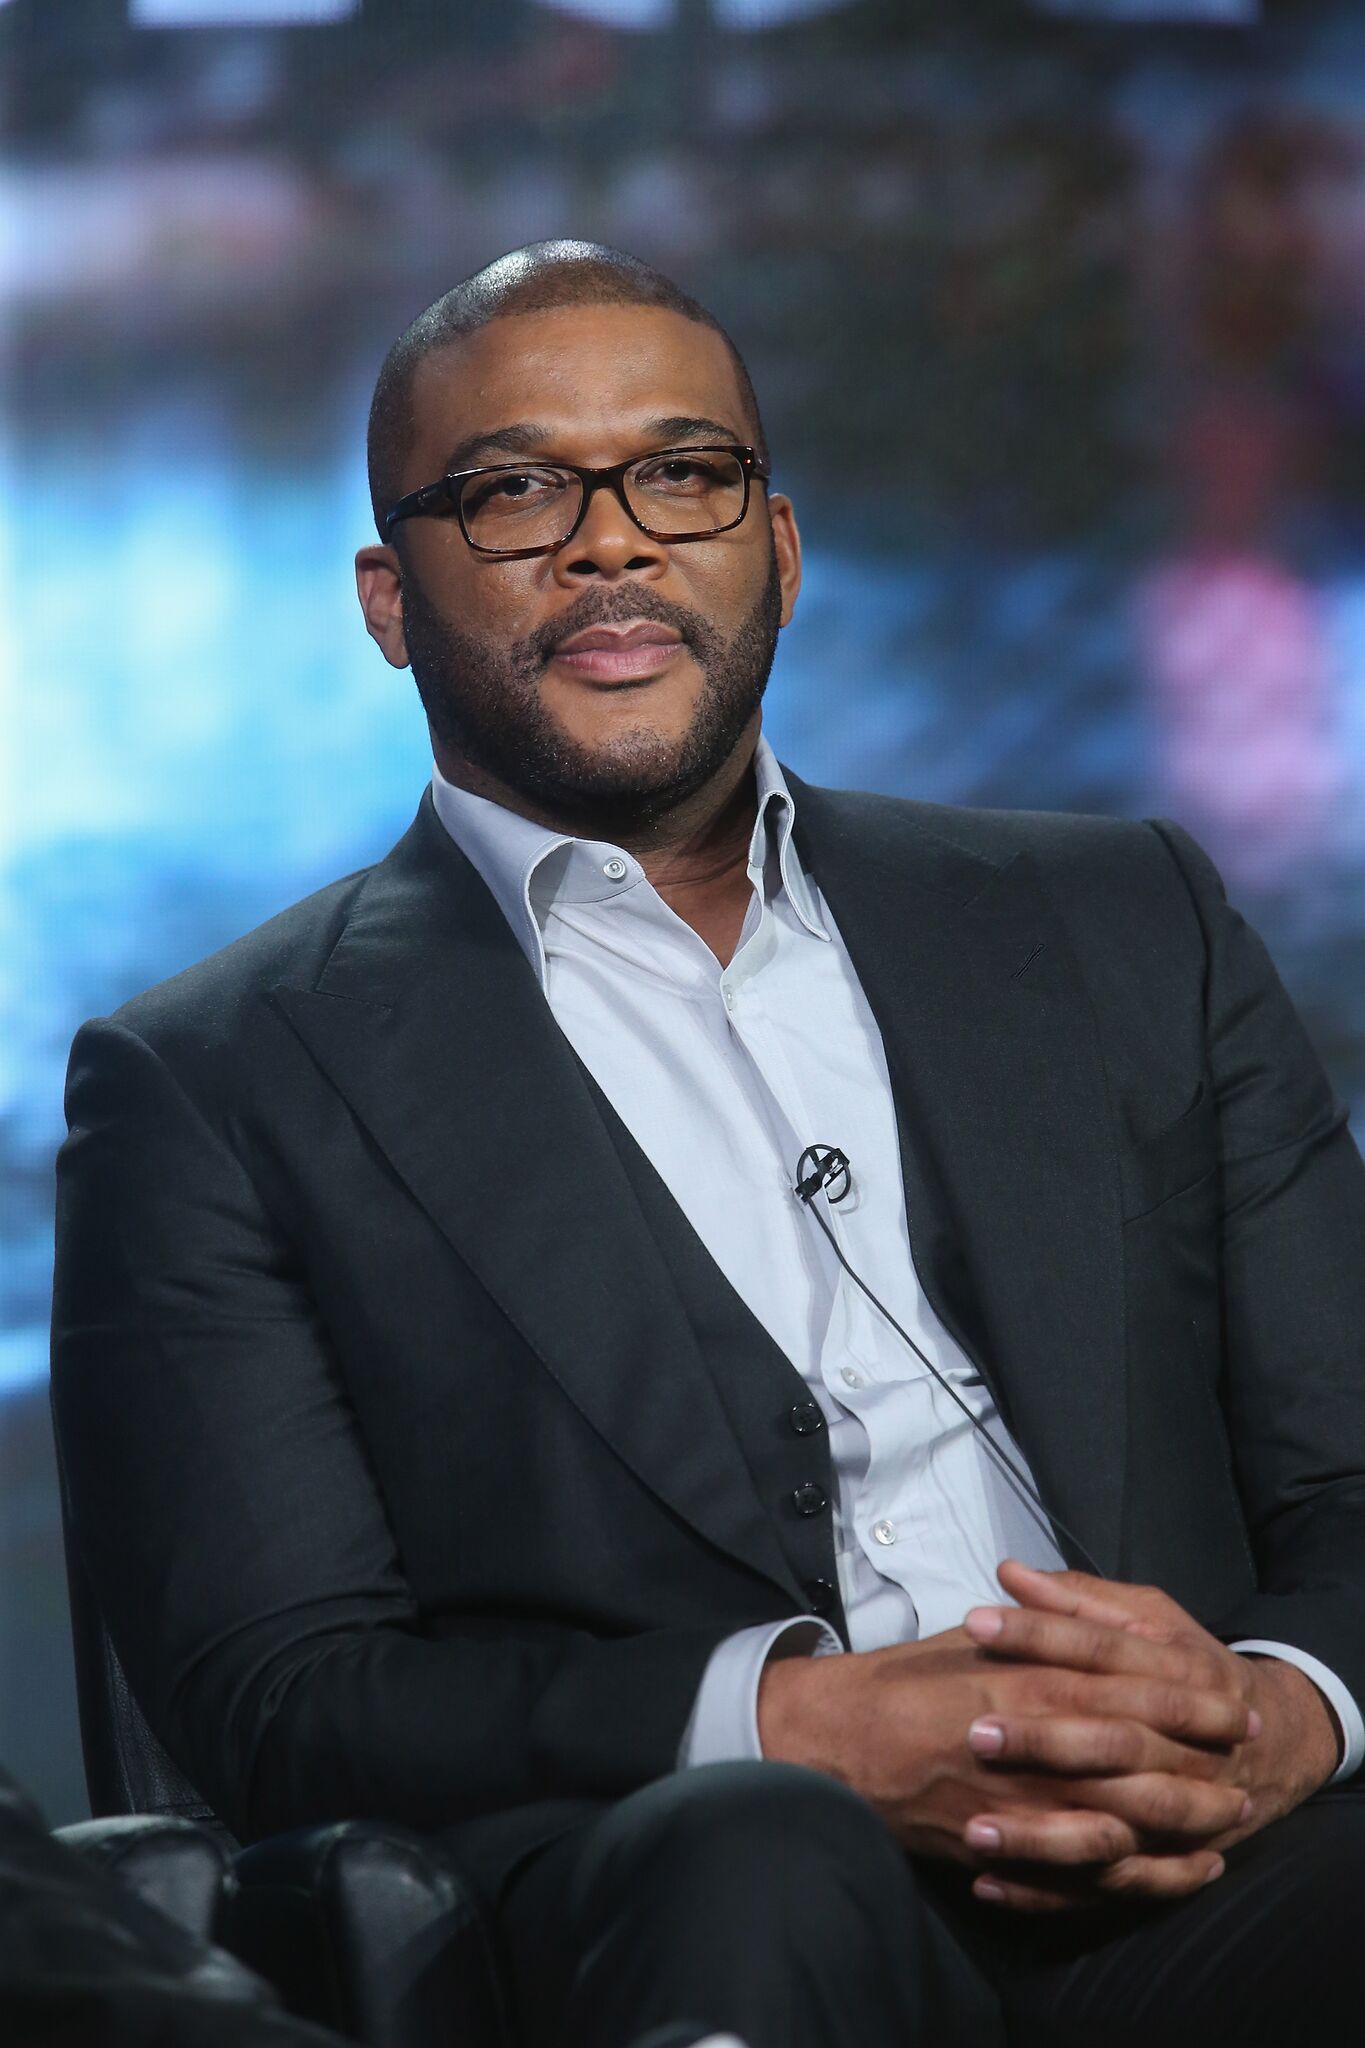 Host/Narrator Tyler Perry speaks onstage during "The Passion" panel discussion at the FOX portion of the 2015 Winter TCA Tour at the Langham Huntington Hotel on January 15, 2016 | Photo: Getty Images